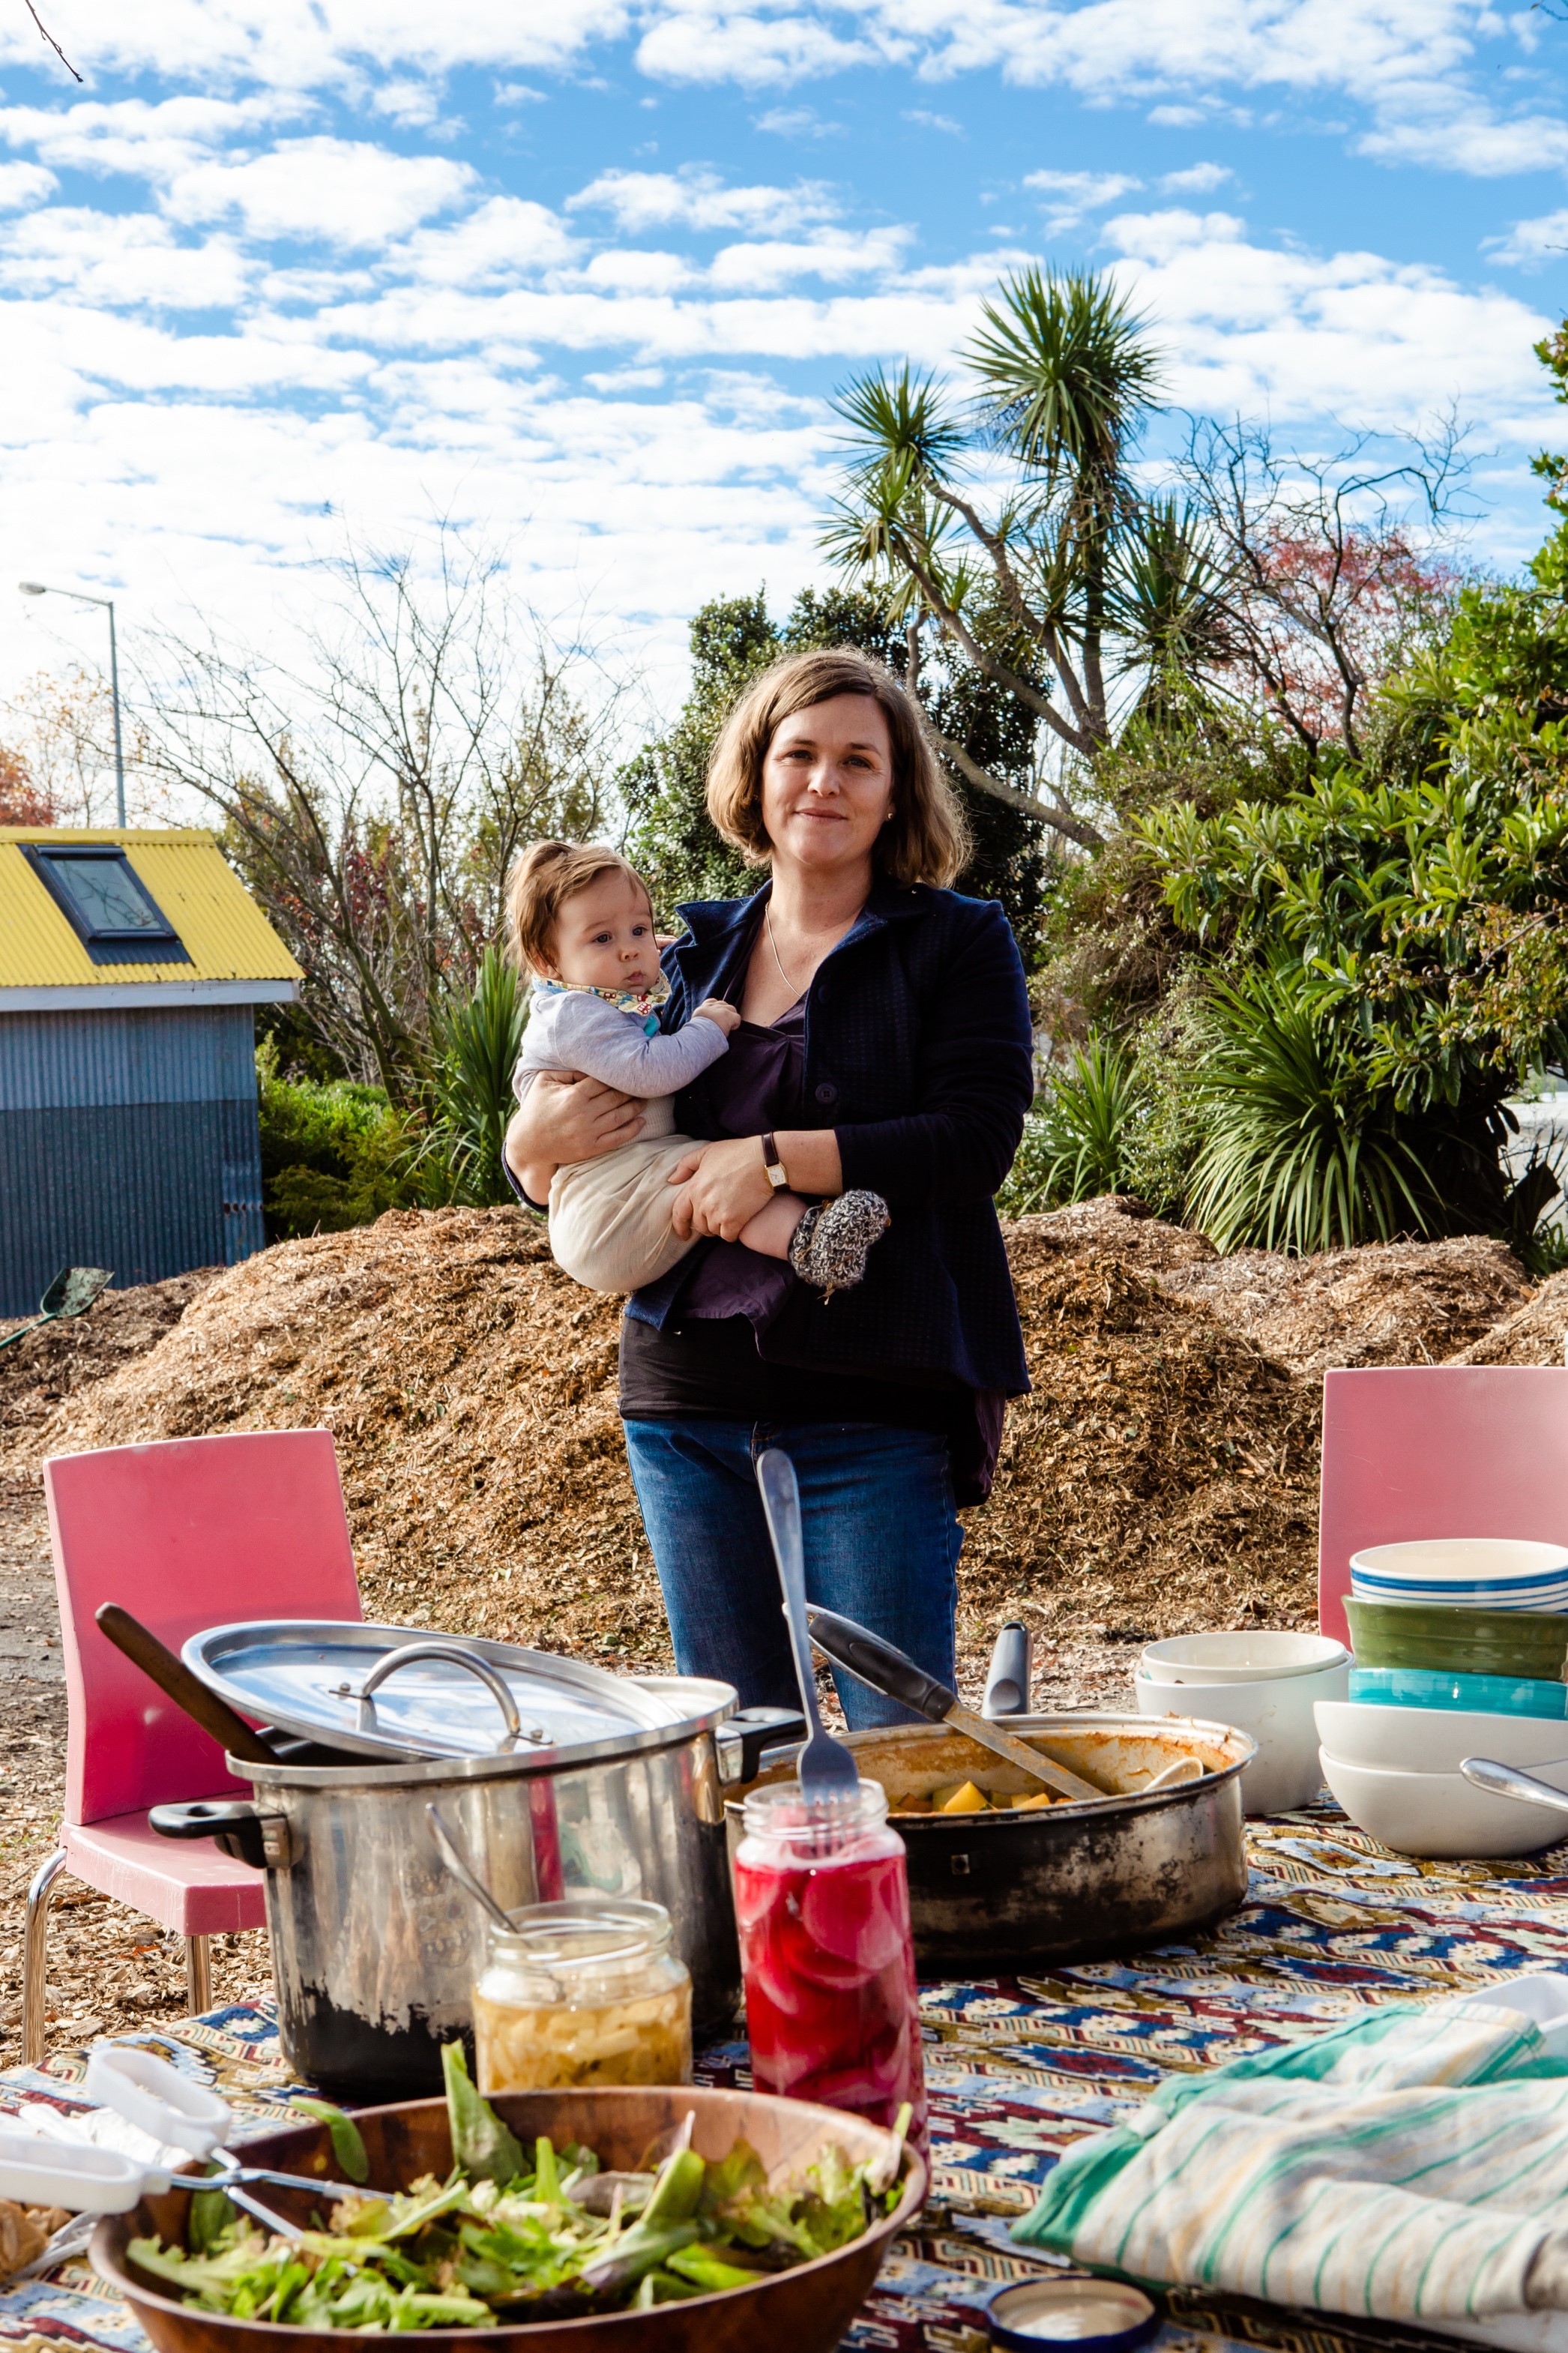 Kelly stands holding a baby. Behind her is a pile of mulch and an urban garden. In front, a table laid out with food. 